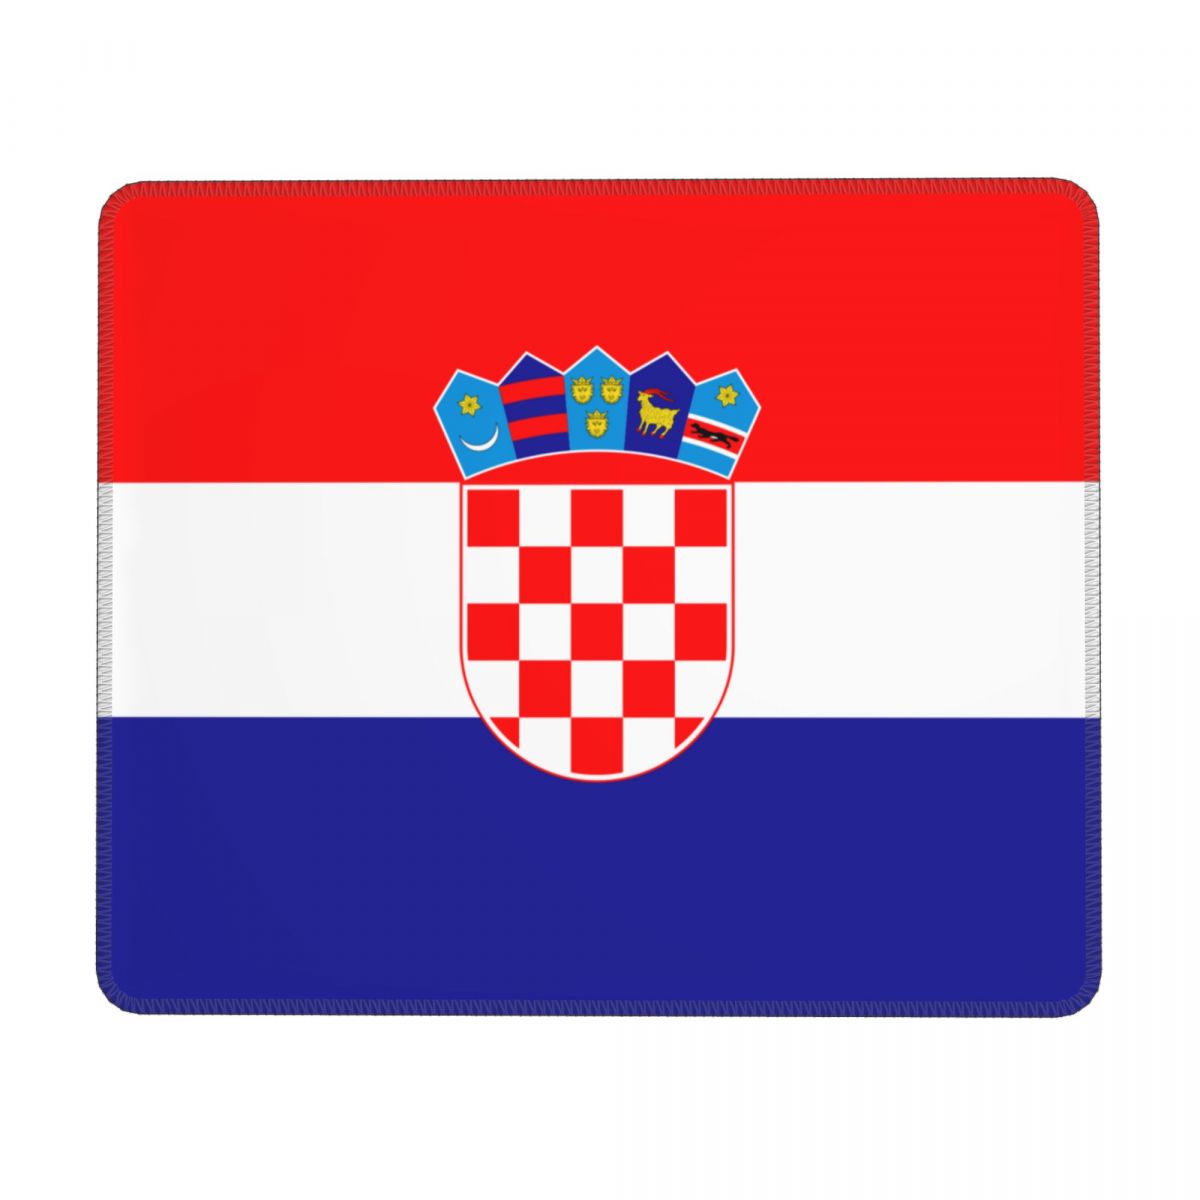 Croatia Square Gaming Mouse Pad with Stitched Edge